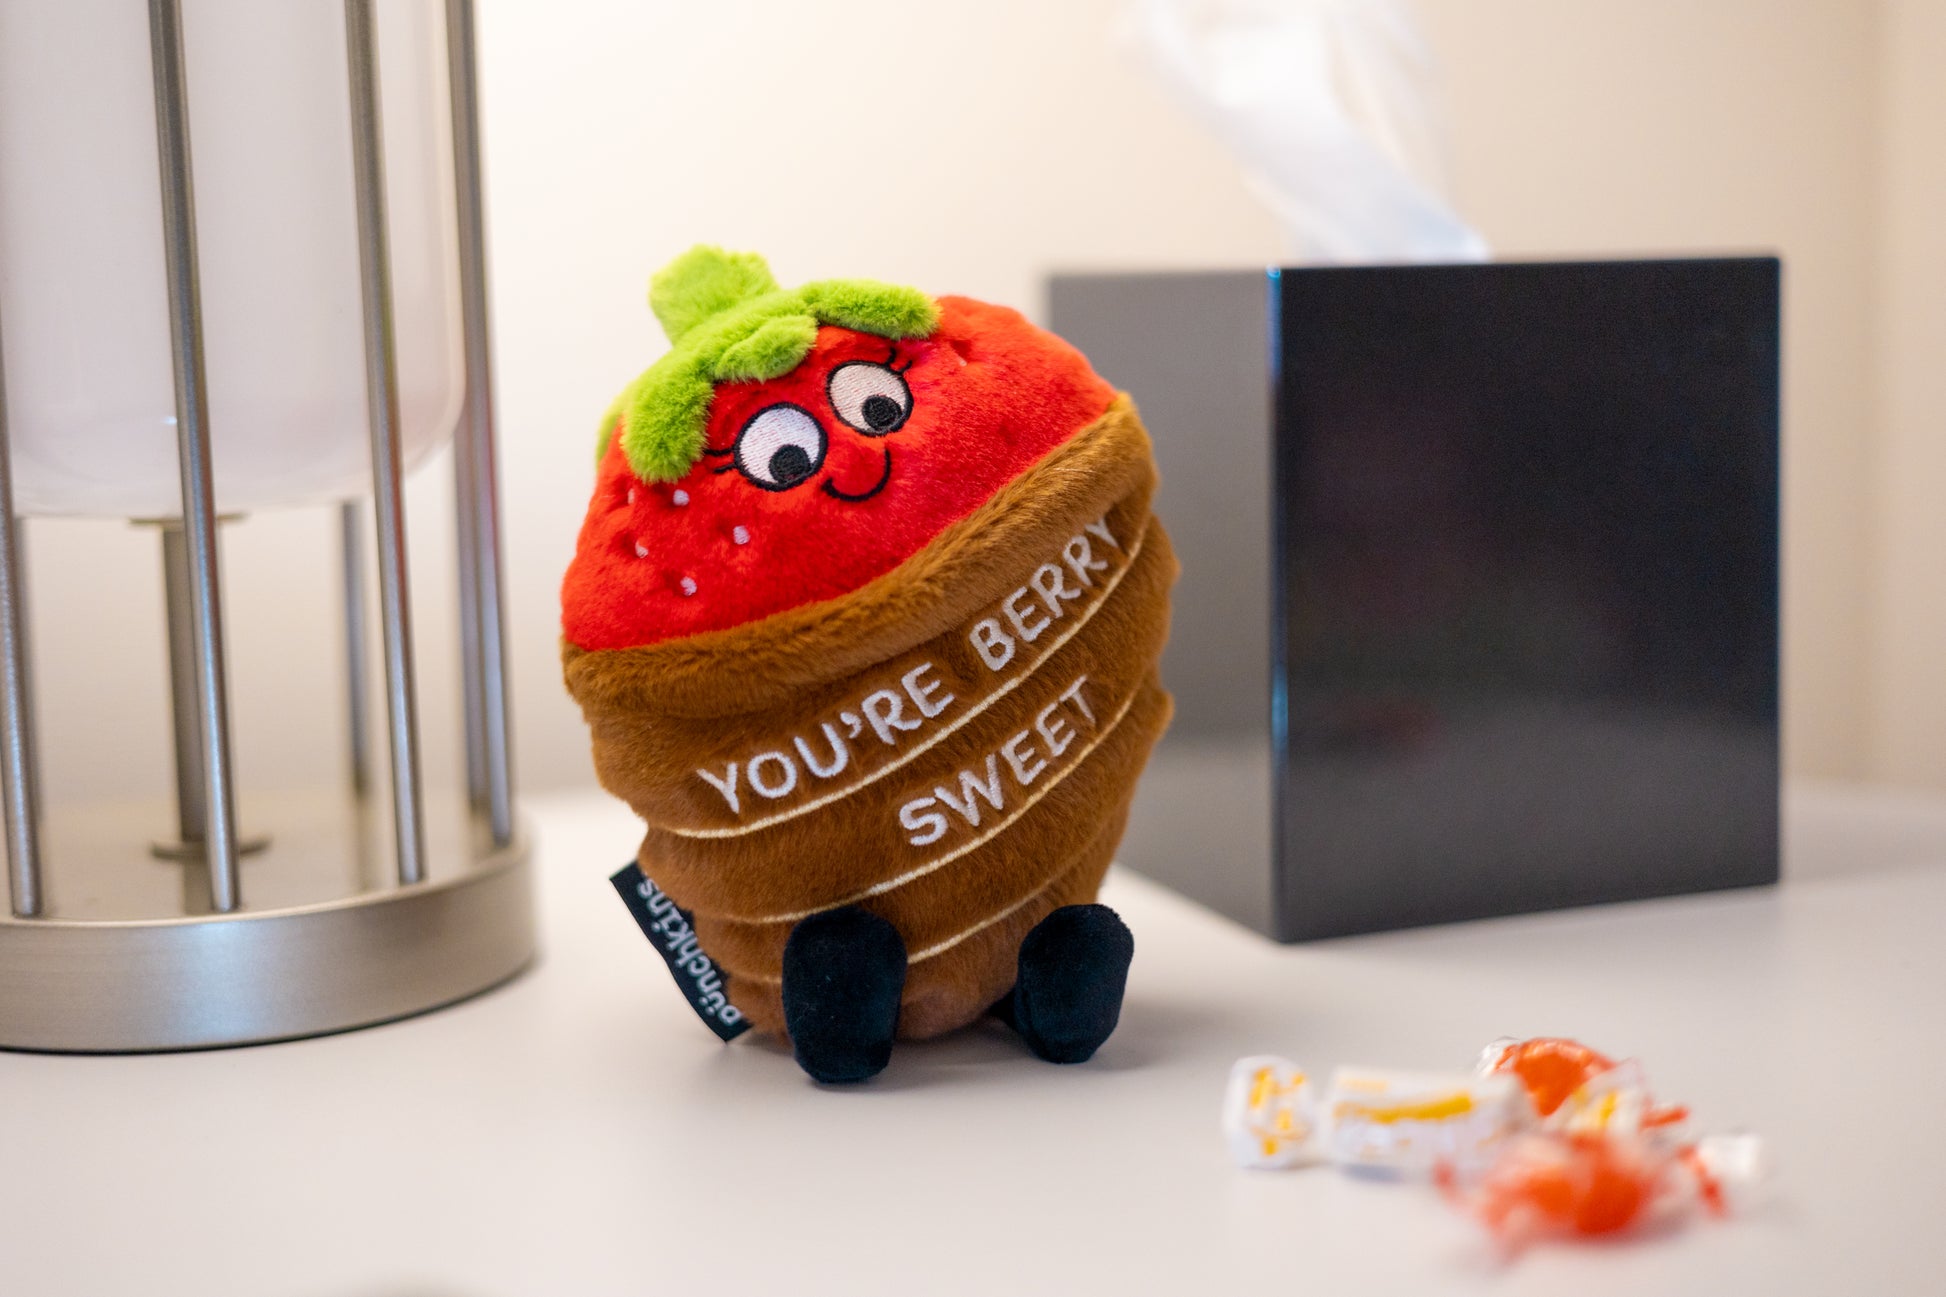 "You're Berry Sweet" Strawberry Plush